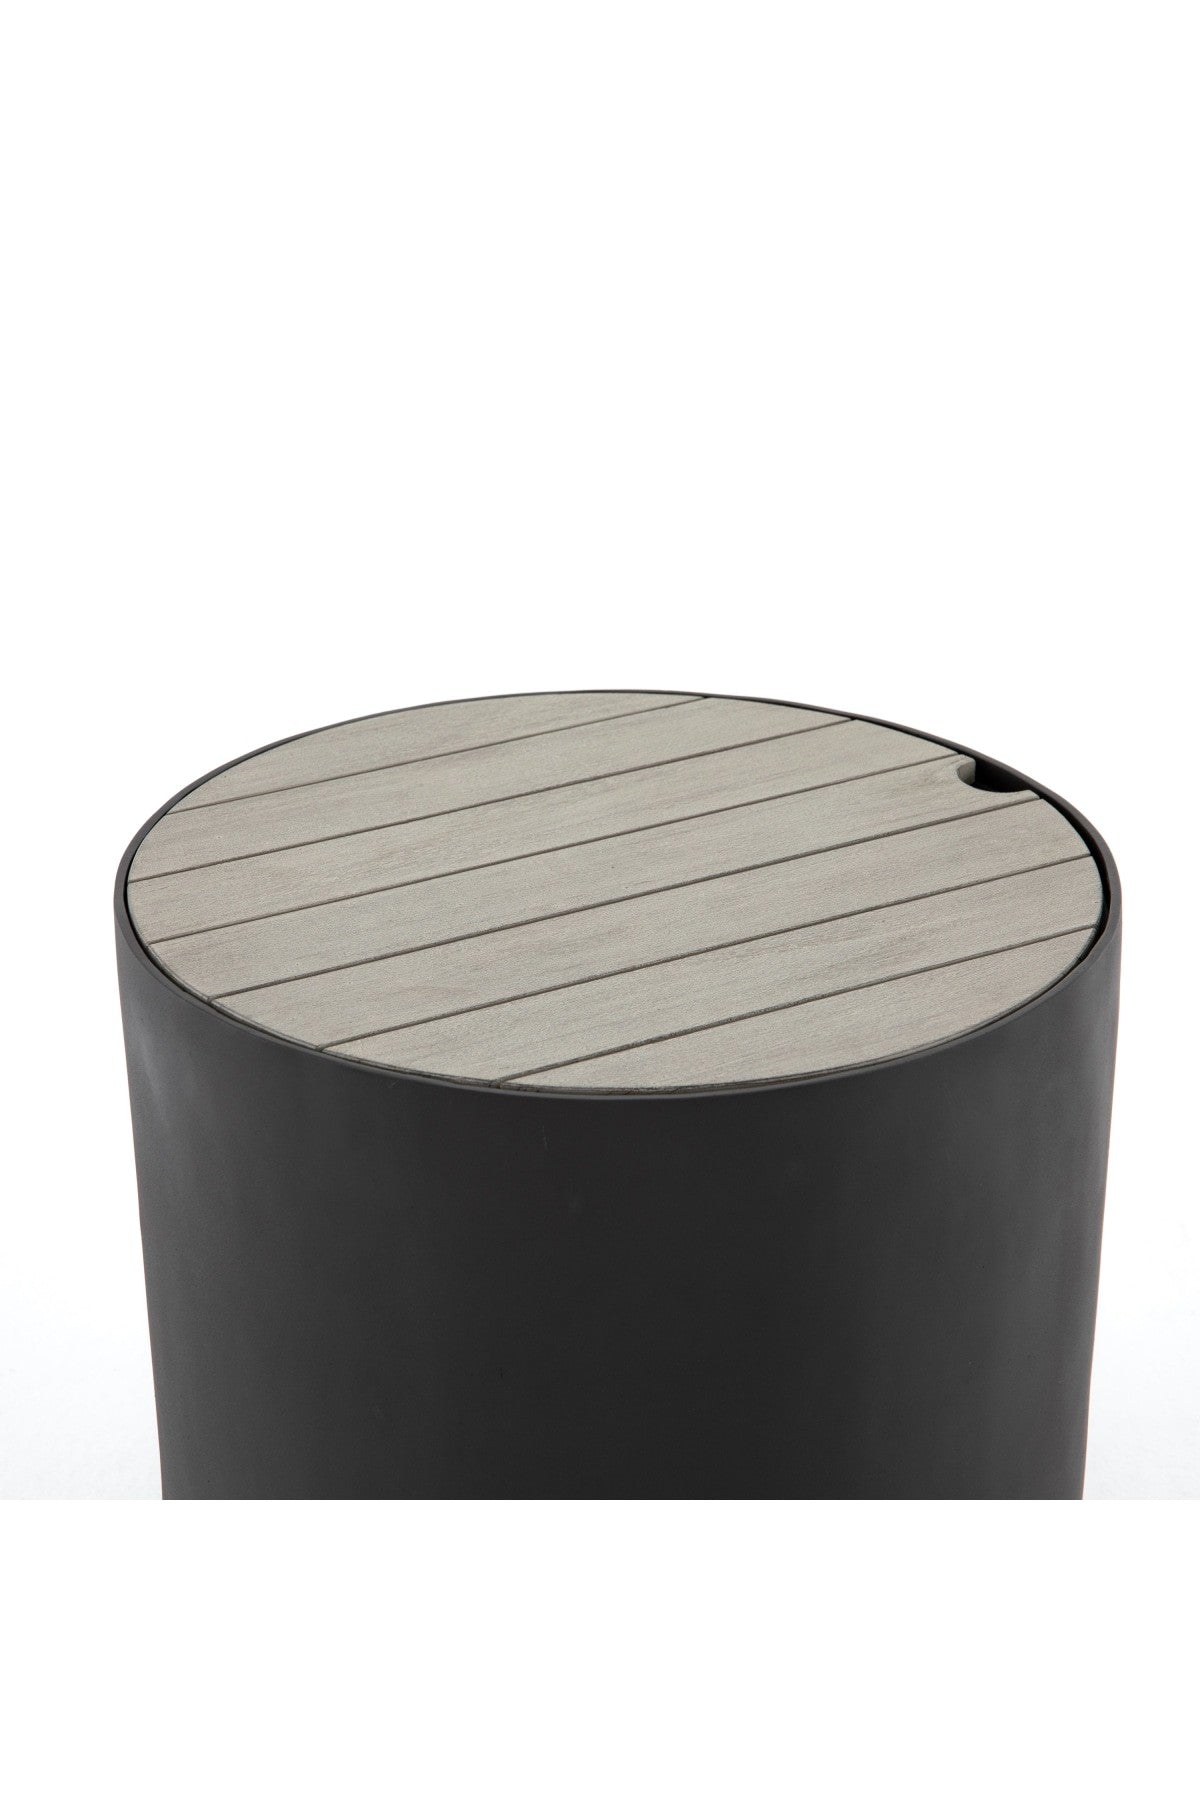 Kaye Outdoor End Table